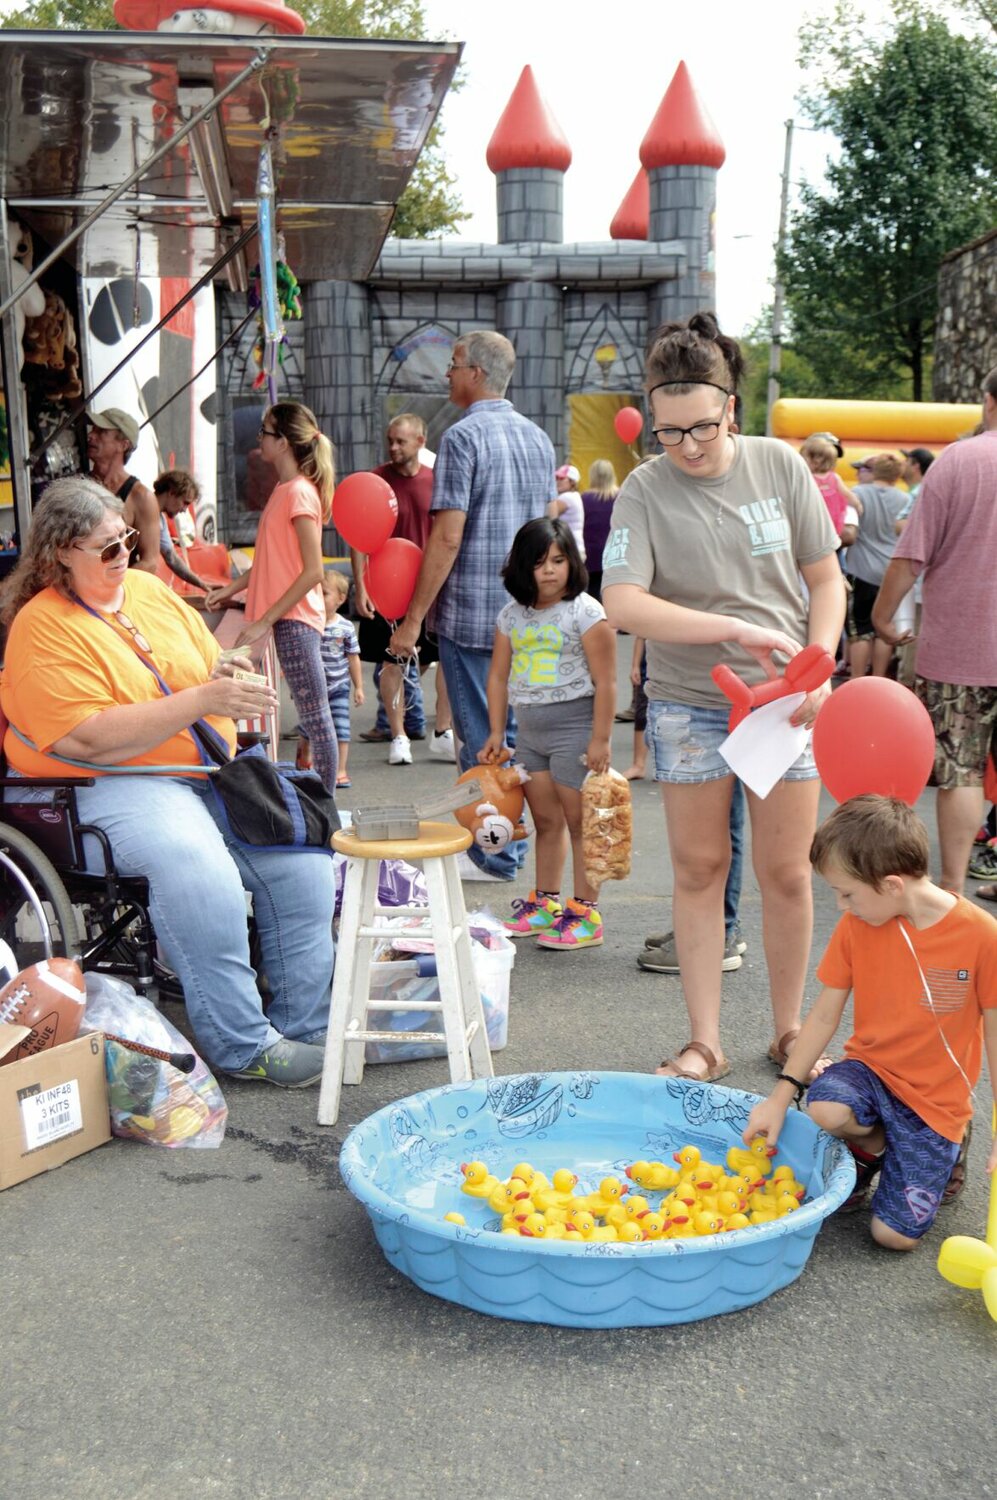 Seven years old at the time this photo was taken five years ago, Lanton resident Daegan Lashley tries to find the lucky duck that will win him a prize. Alton's 38th Black Gold Walnut Festival is this weekend and carnival games will once again be a feature.